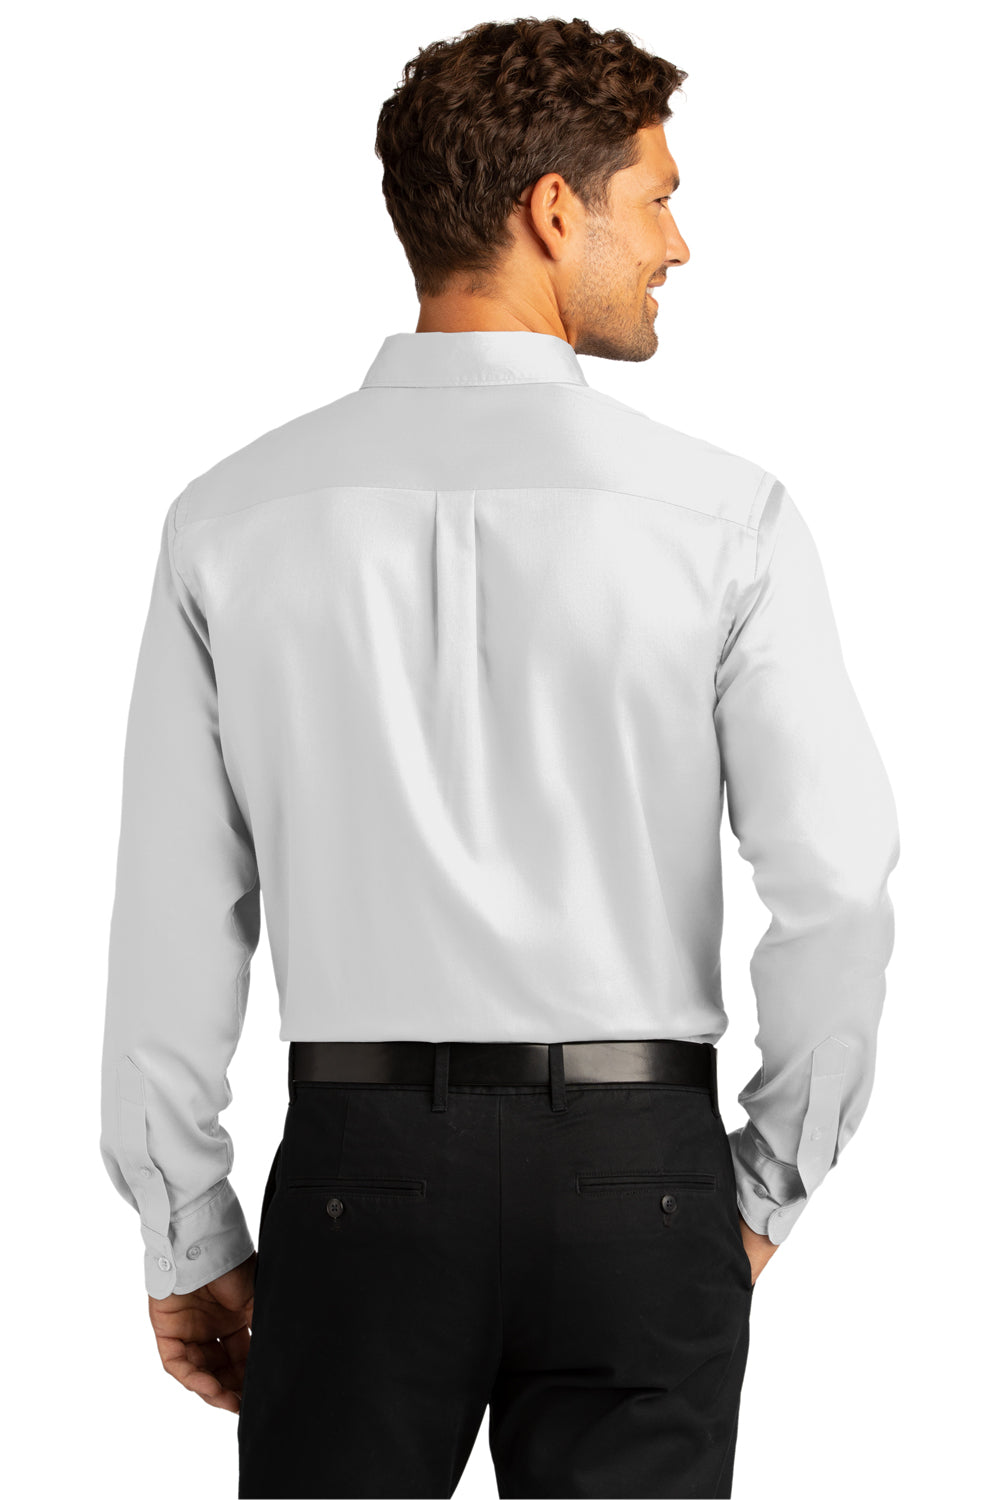 Port Authority Mens SuperPro Wrinkle Resistant React Long Sleeve Button Down Shirt w/ Pocket White Side